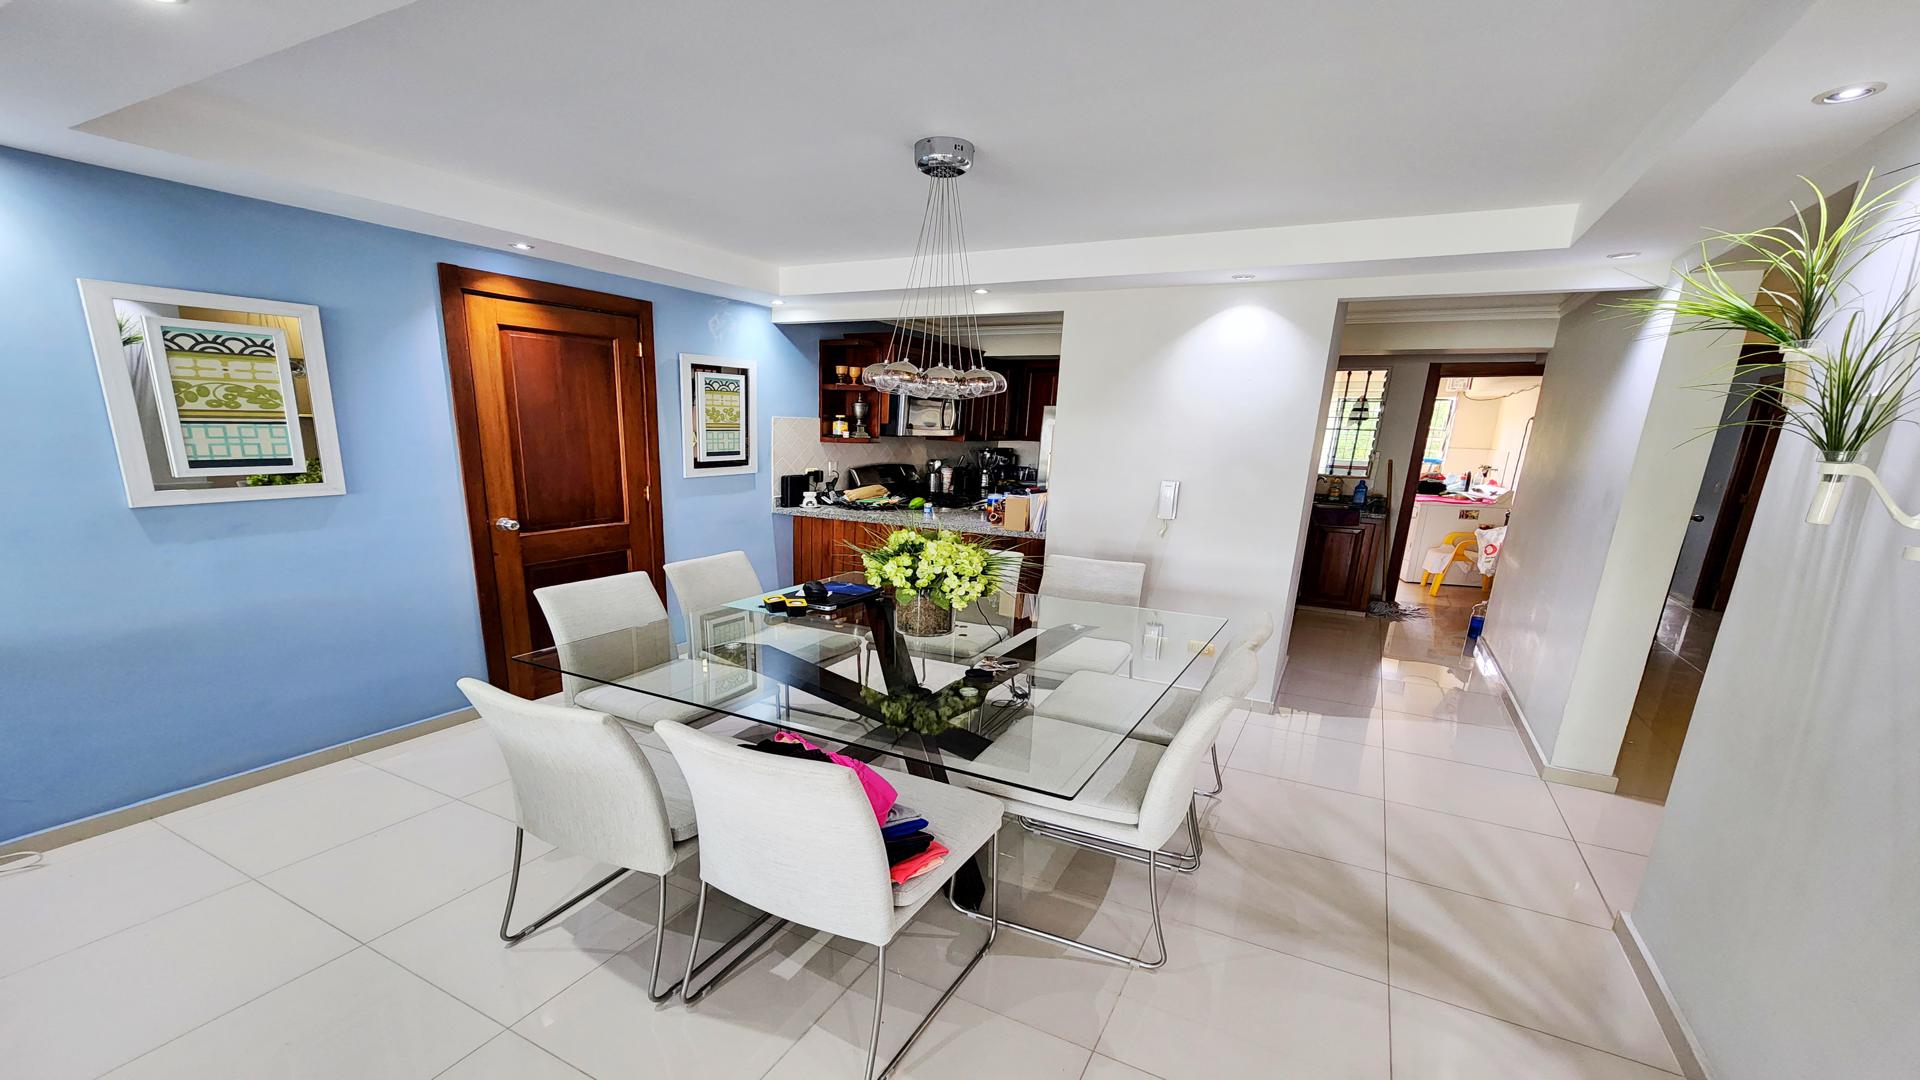 penthouses - Penthouse Av. Independencia 3